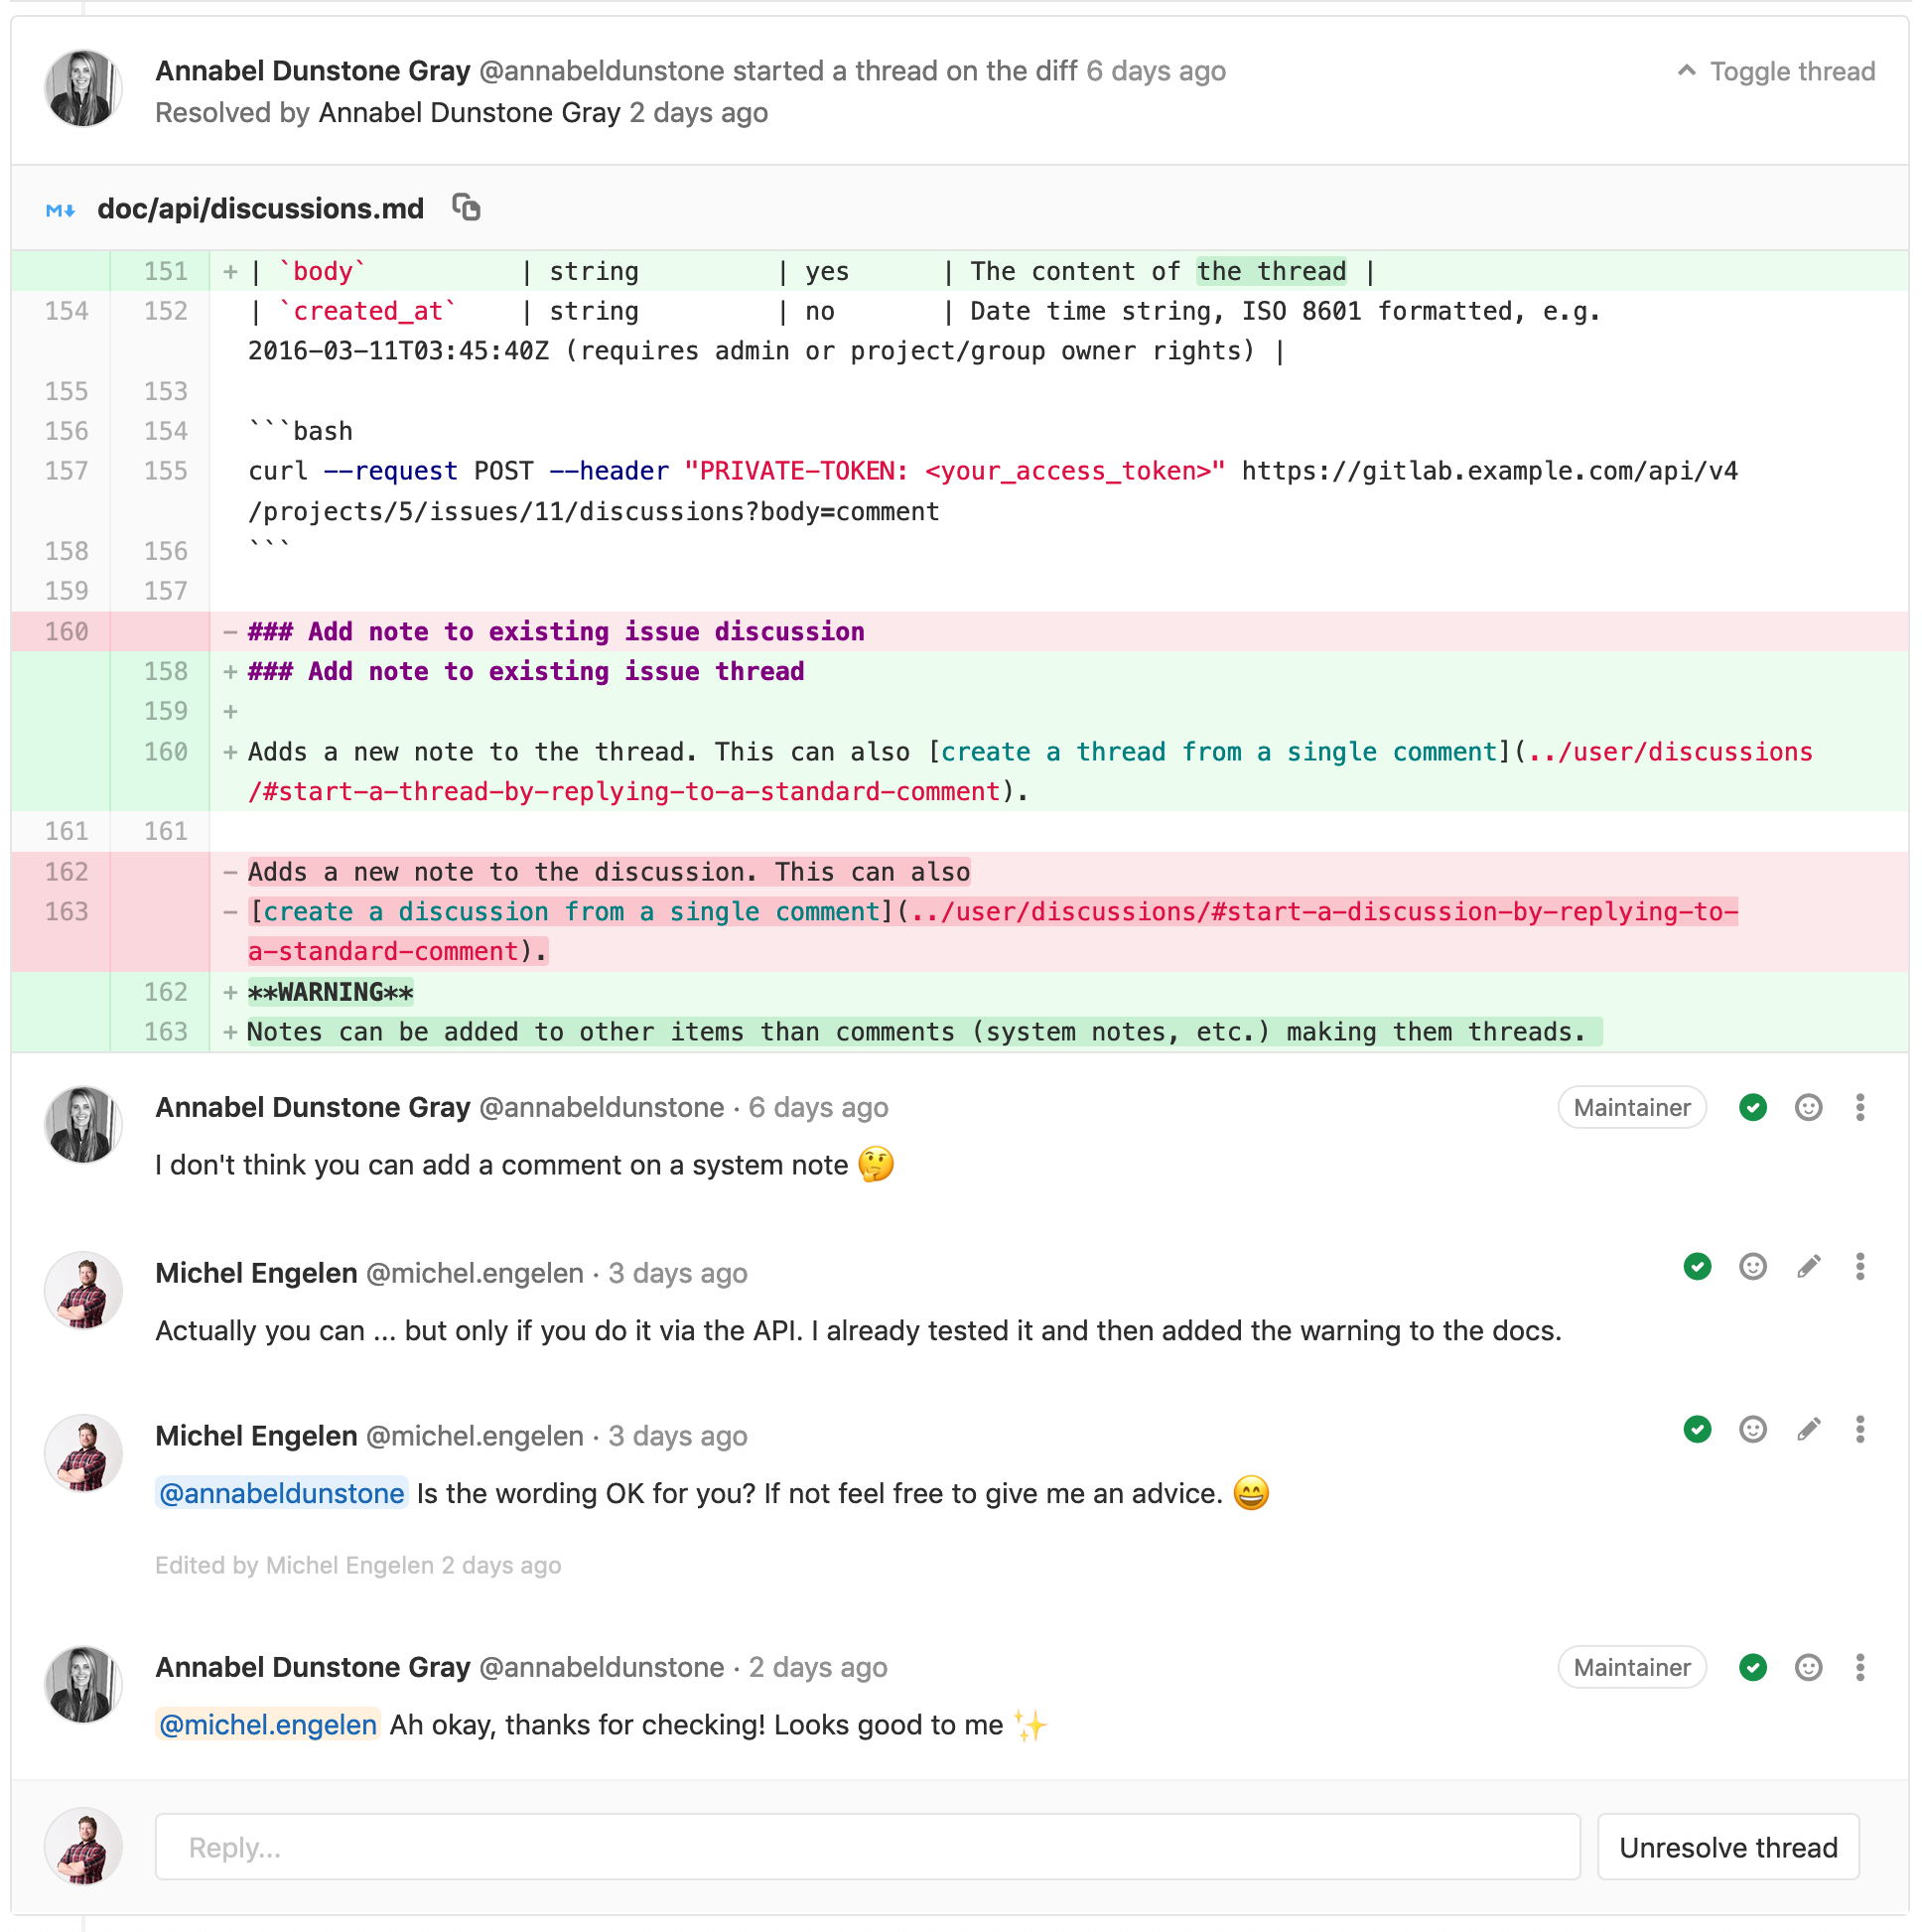 doc/user/discussions/img/thread_view.png